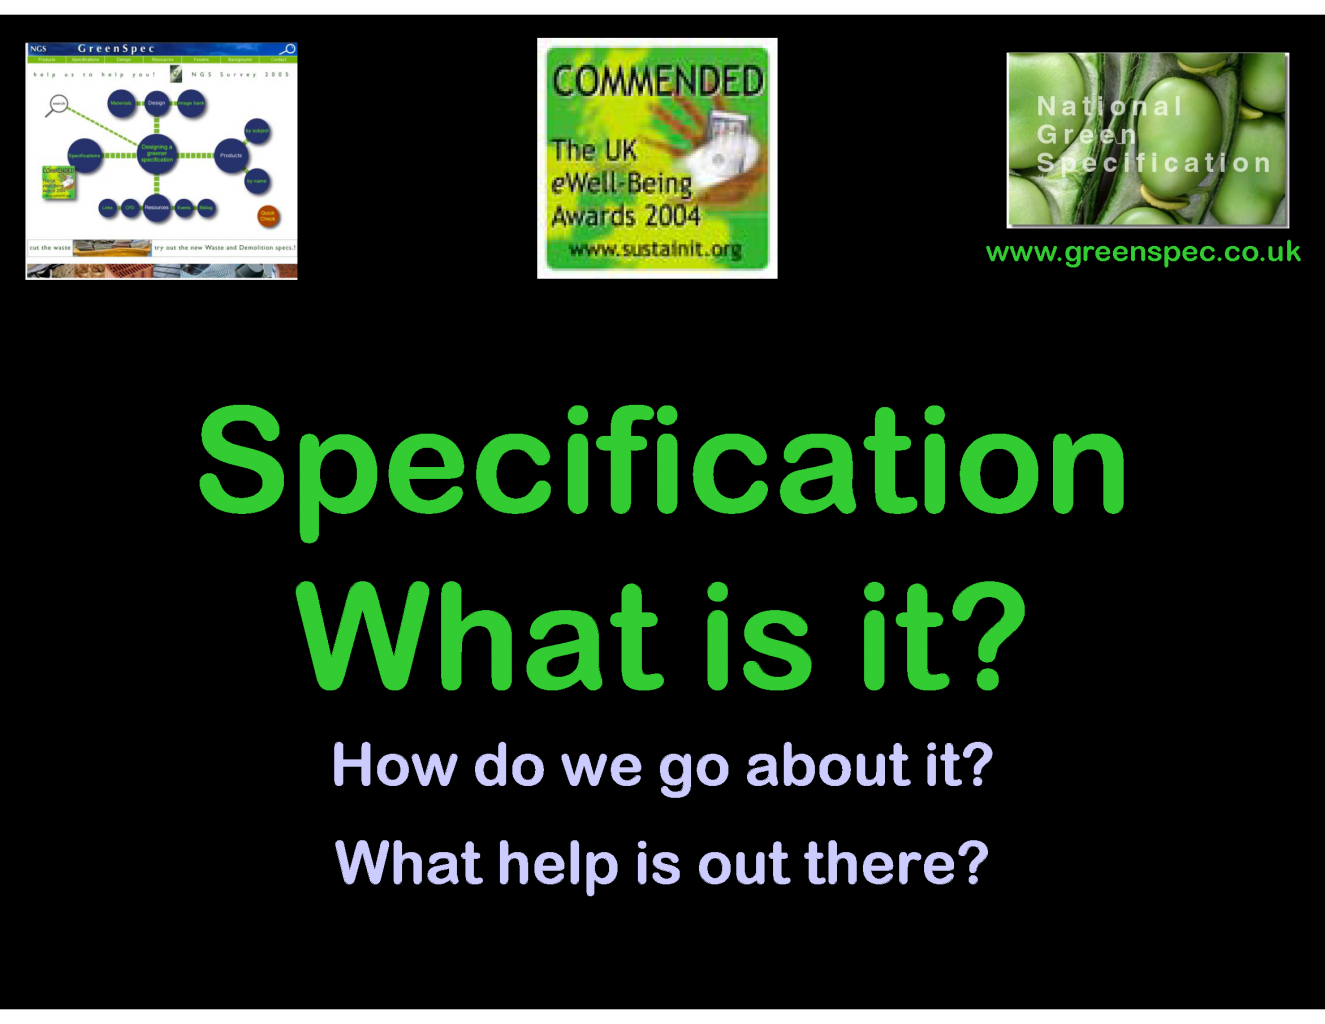 SpecificationWhatIsIt